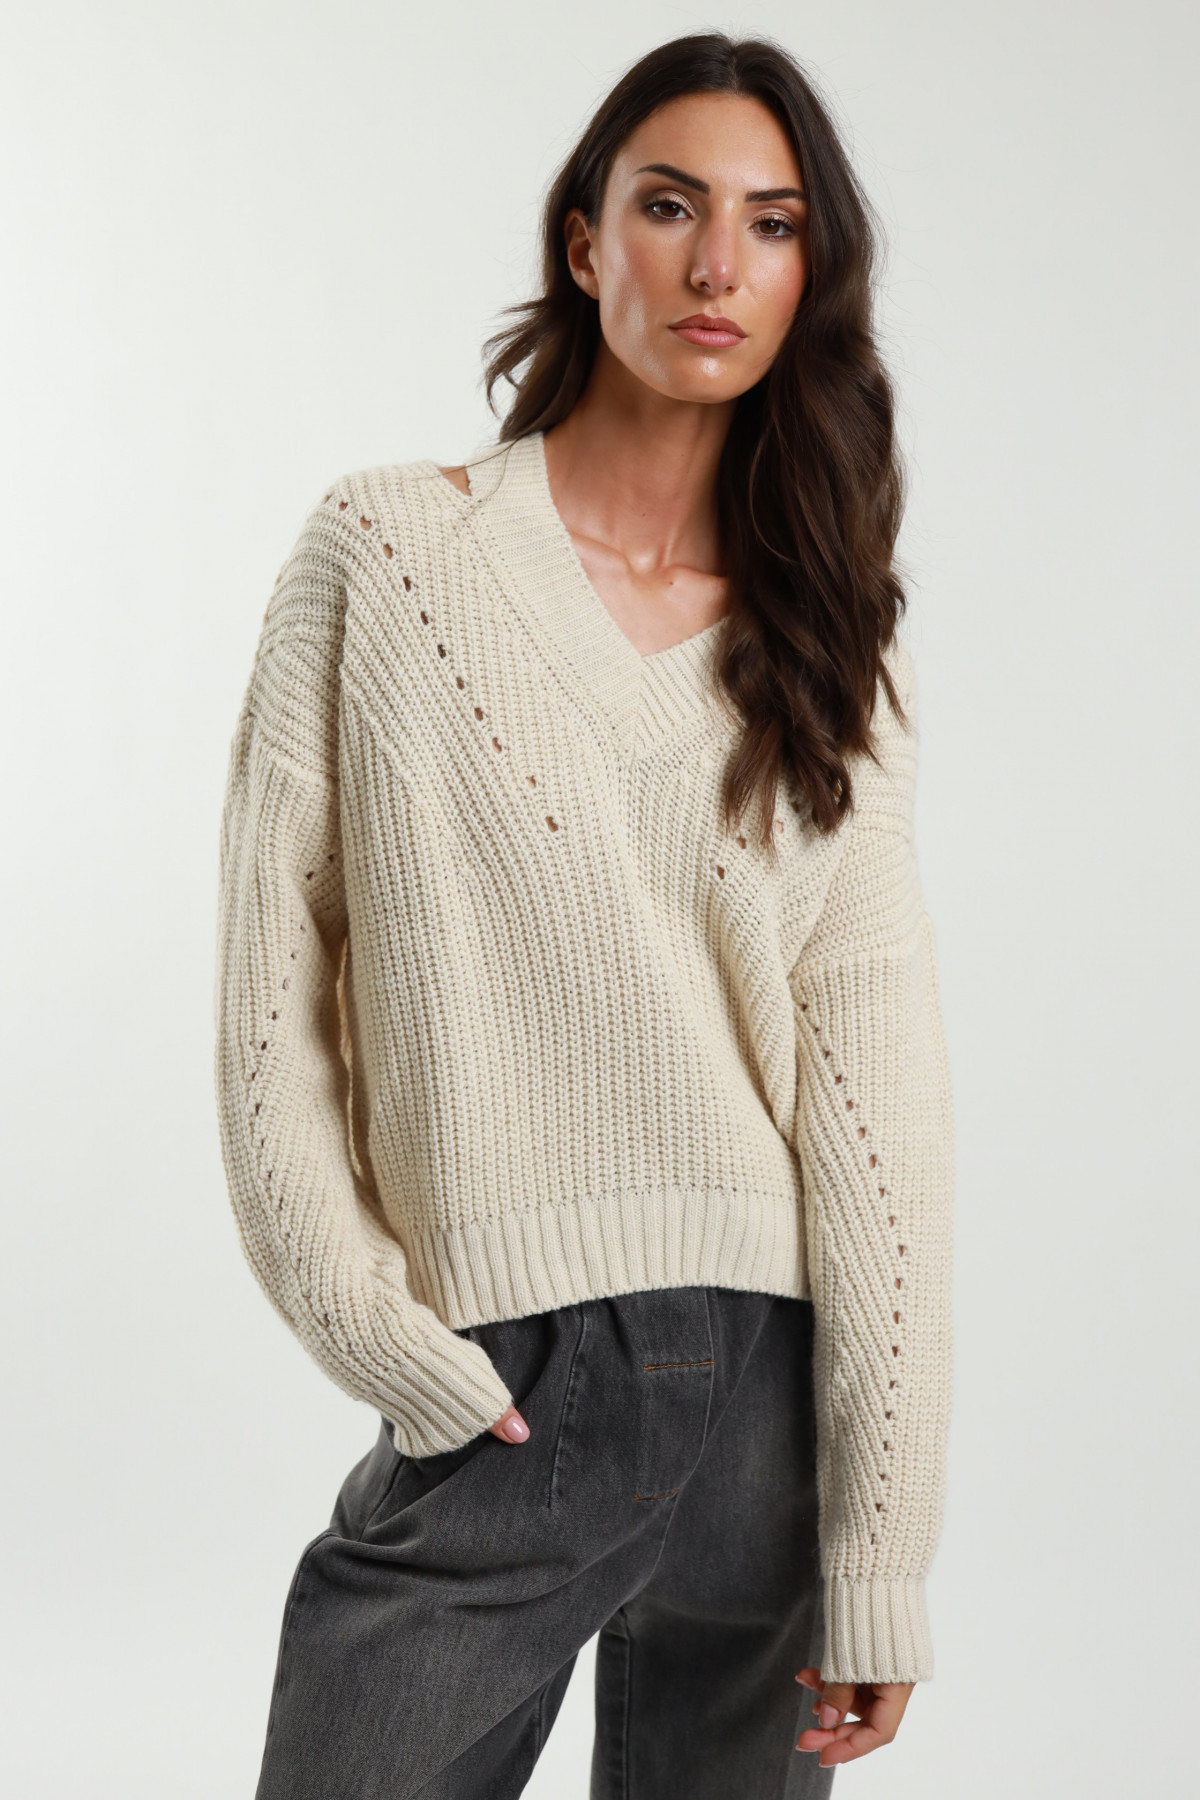 Cut Out sweater